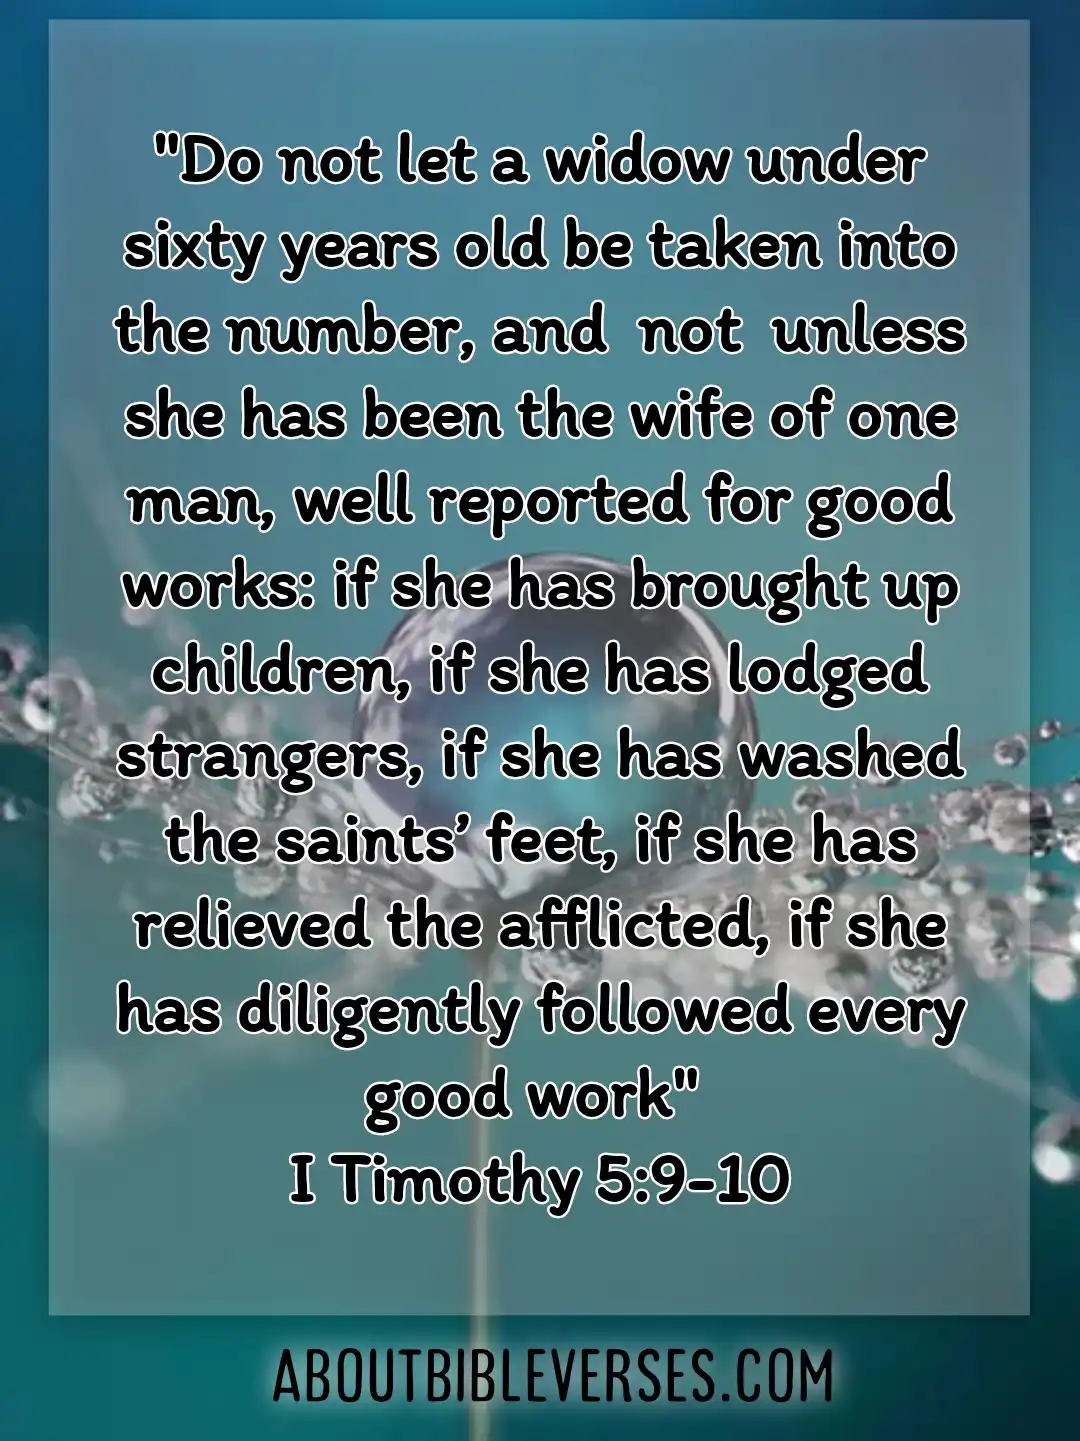 bible verses about widows (1 Timothy 5:9-10)